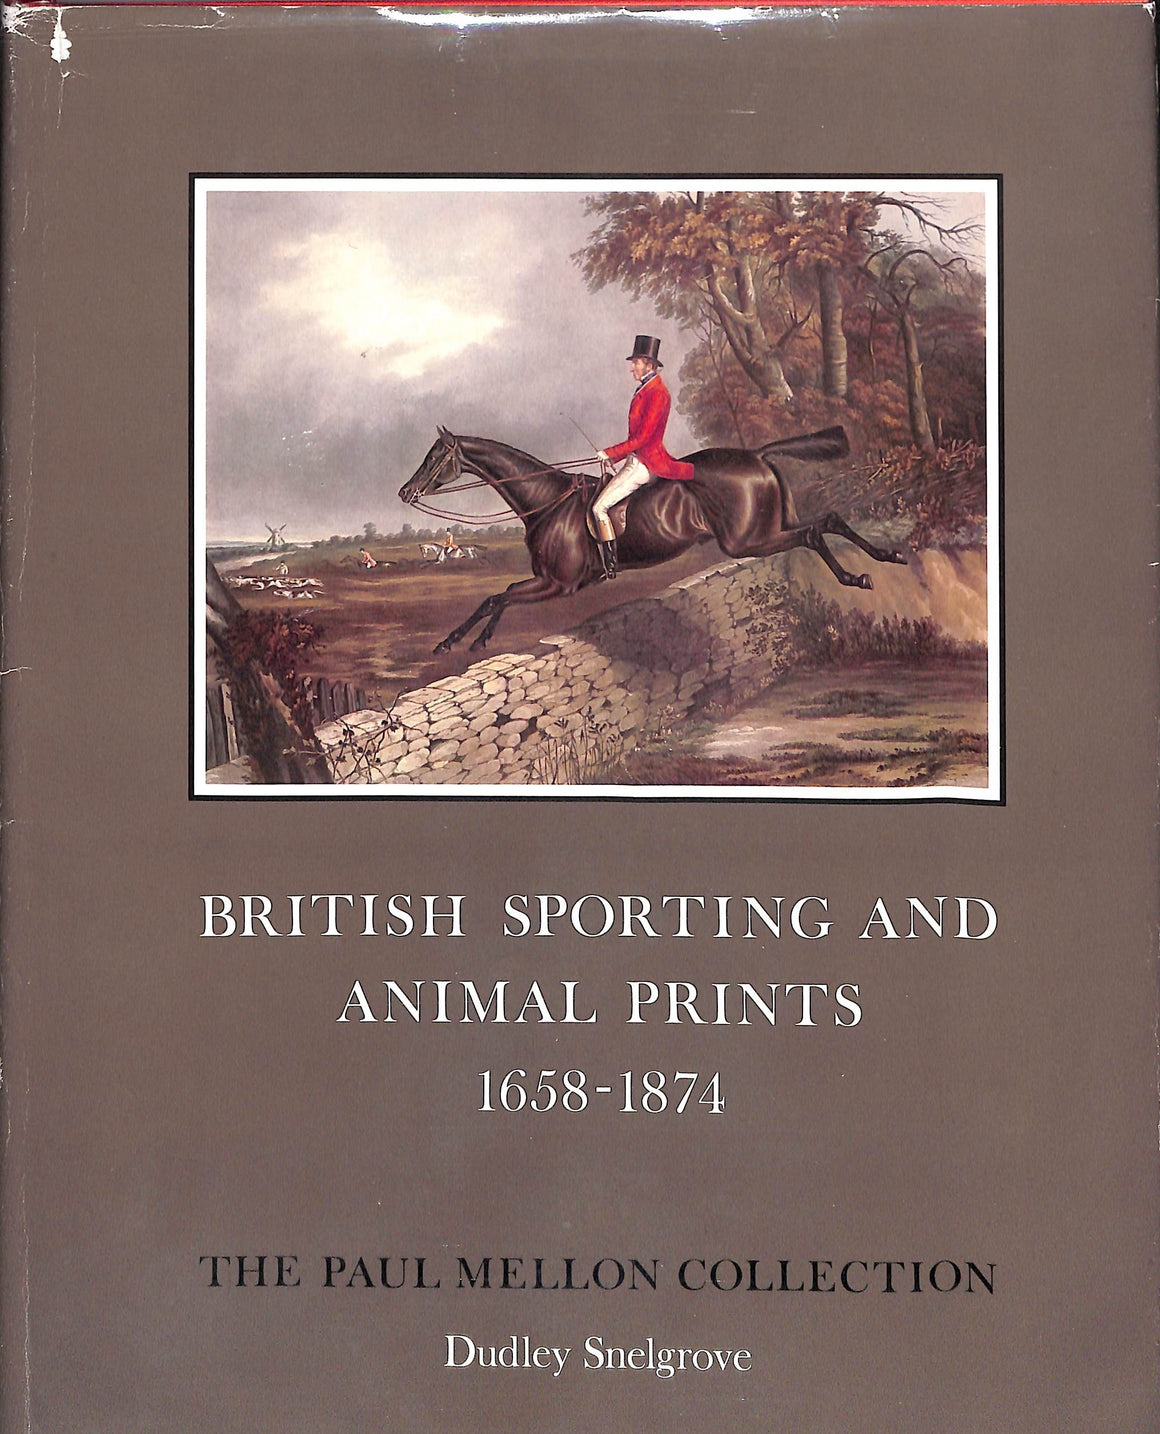 "British Sporting and Animal Prints 1658-1874" SNELGROVE, Dudley [compiled by]